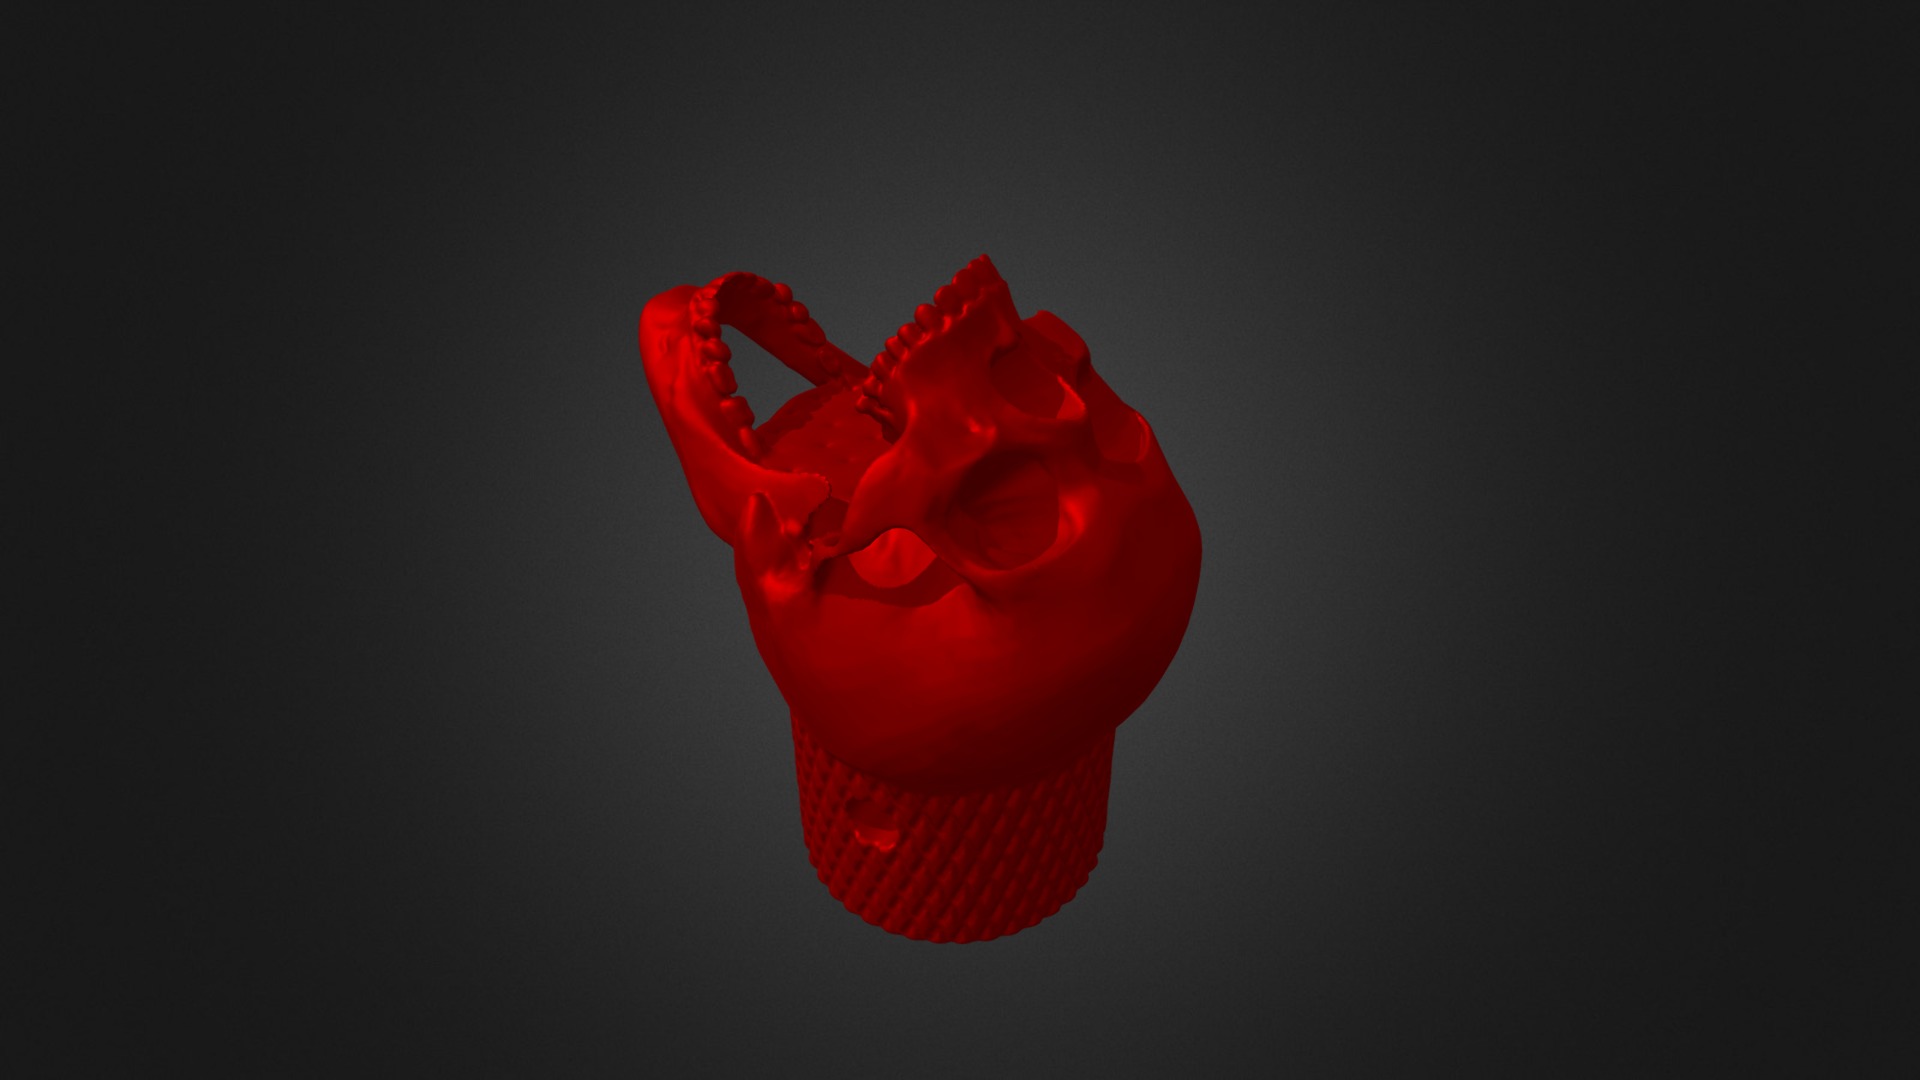 3D model Skull-head-guitar-bass-knob - This is a 3D model of the Skull-head-guitar-bass-knob. The 3D model is about a red rose with a black background.